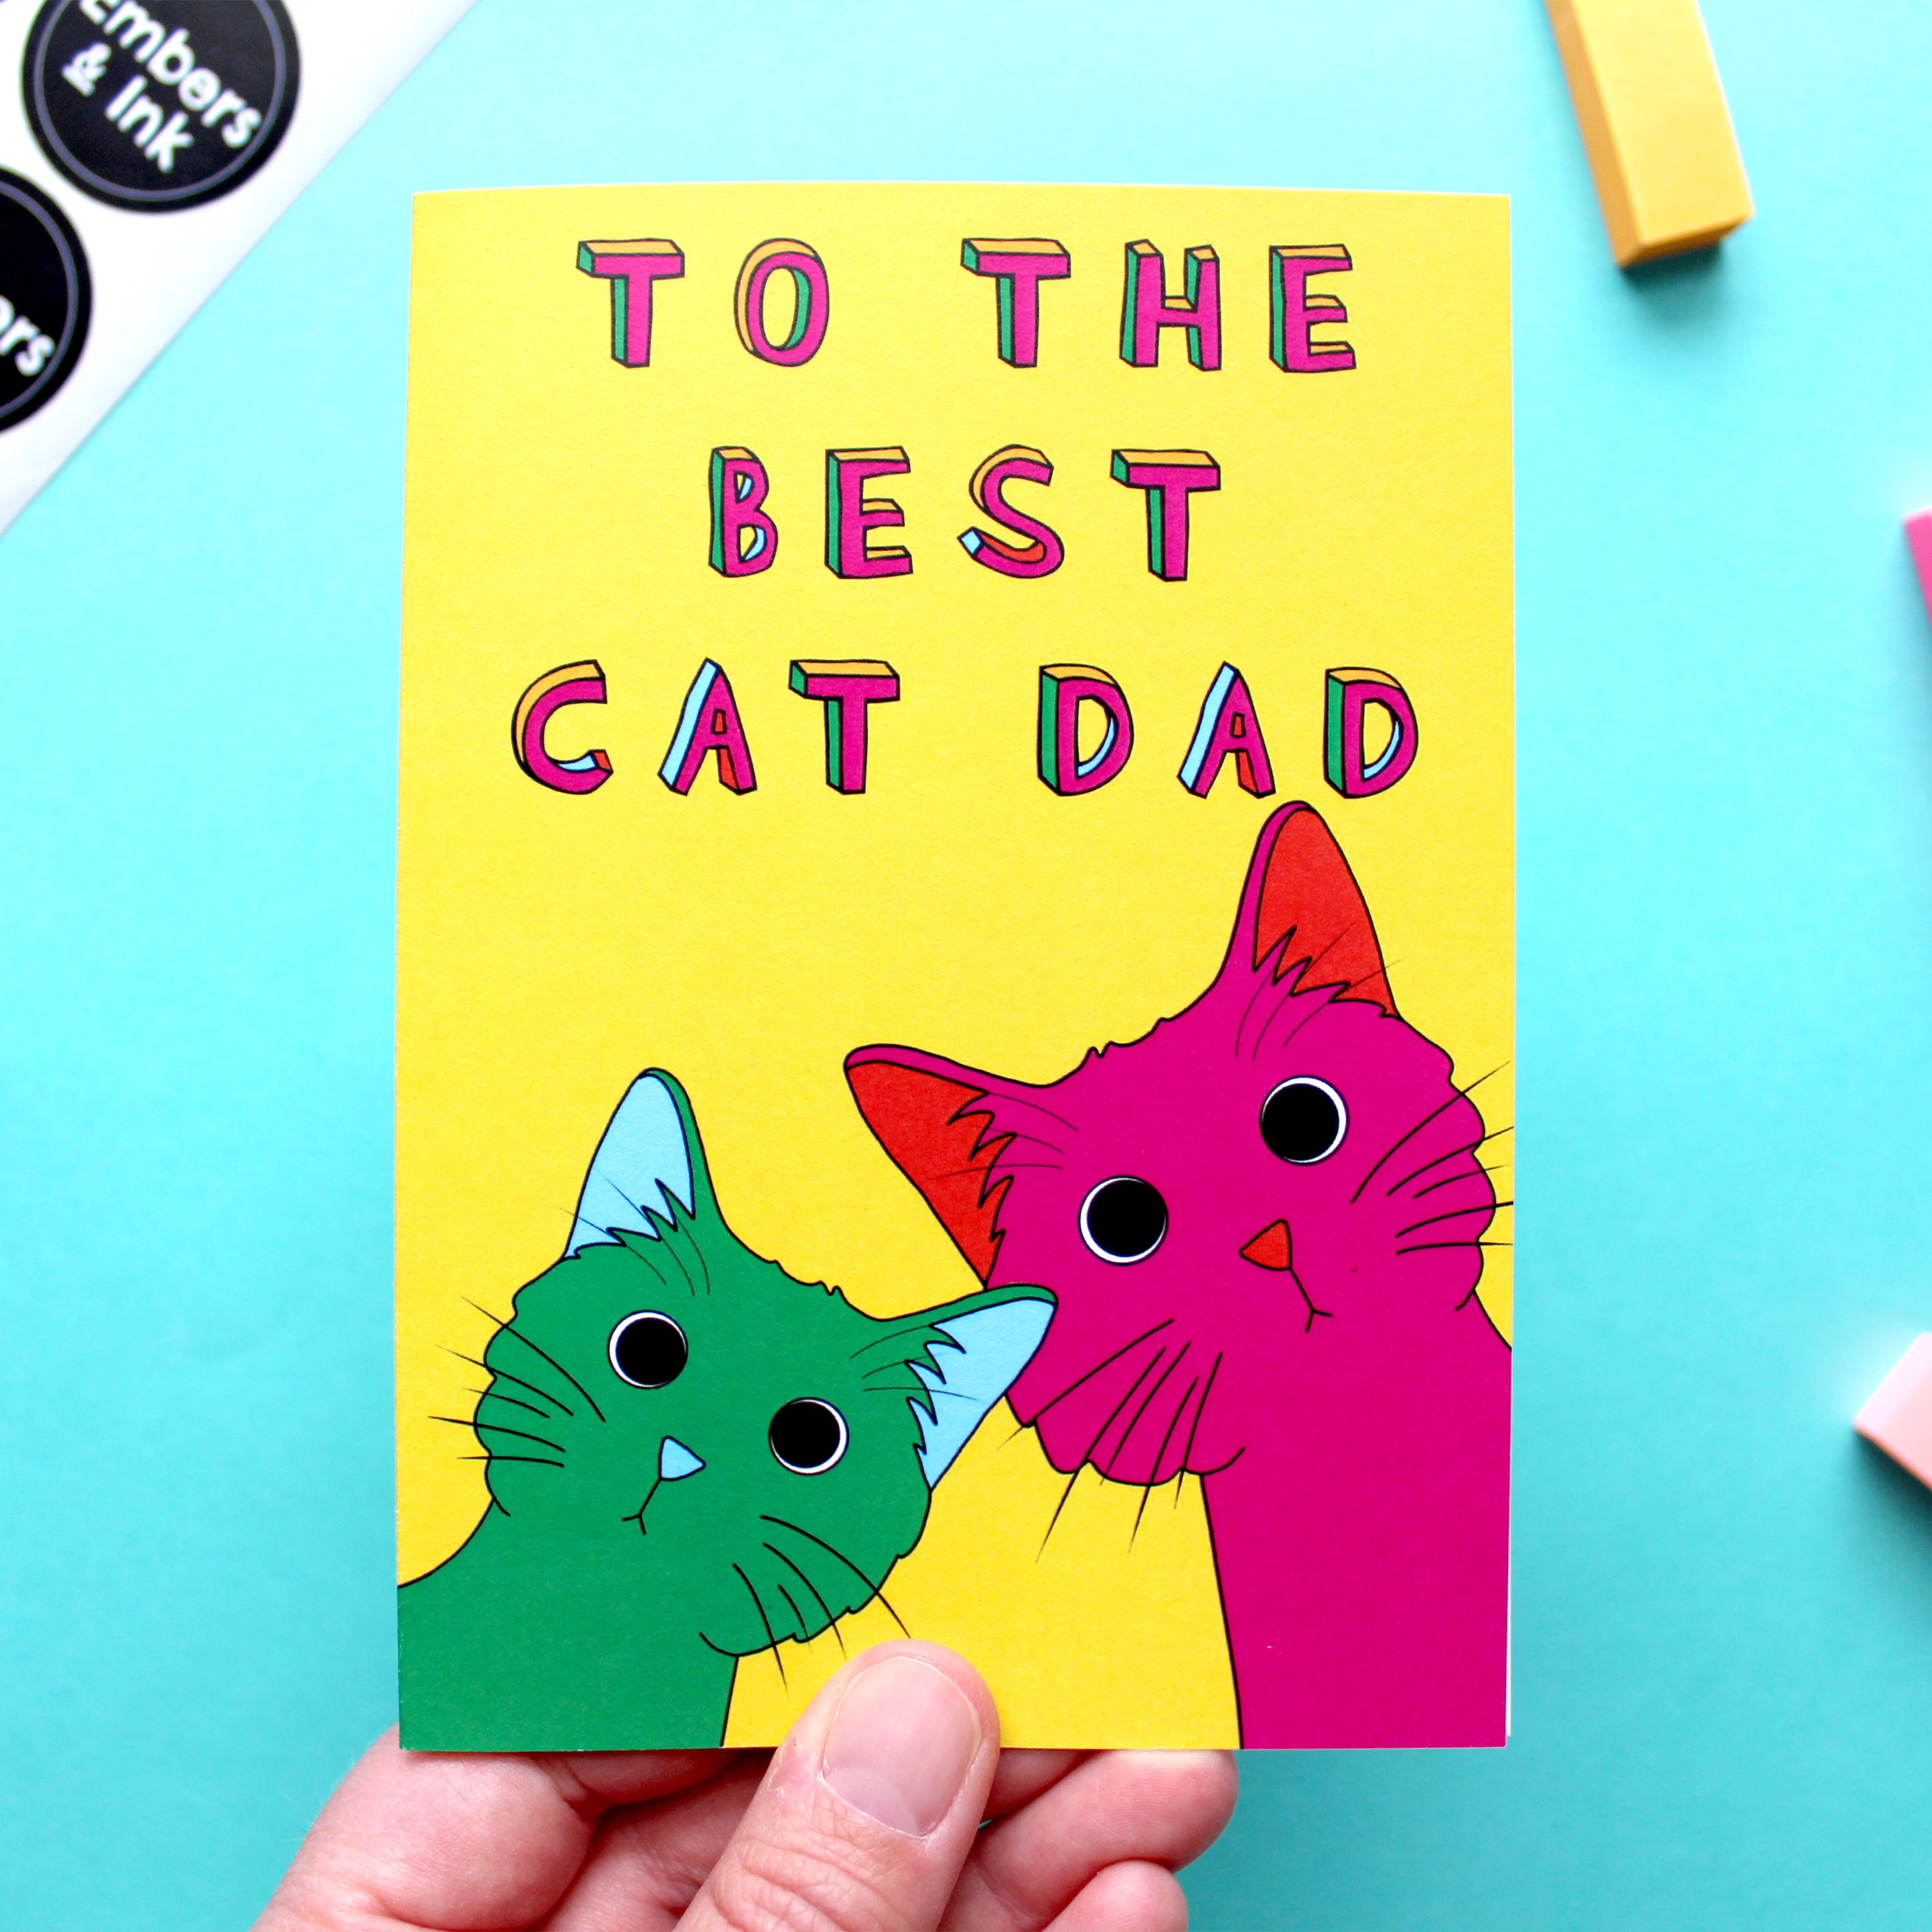 A hand holds a colourful greetings card that has an illustration of two cats under the words 'To the best cat dad' the left cat is green with blue inner ears and nose, and the right cat is pink with orange inner ear and nose. They are looking quizzical.